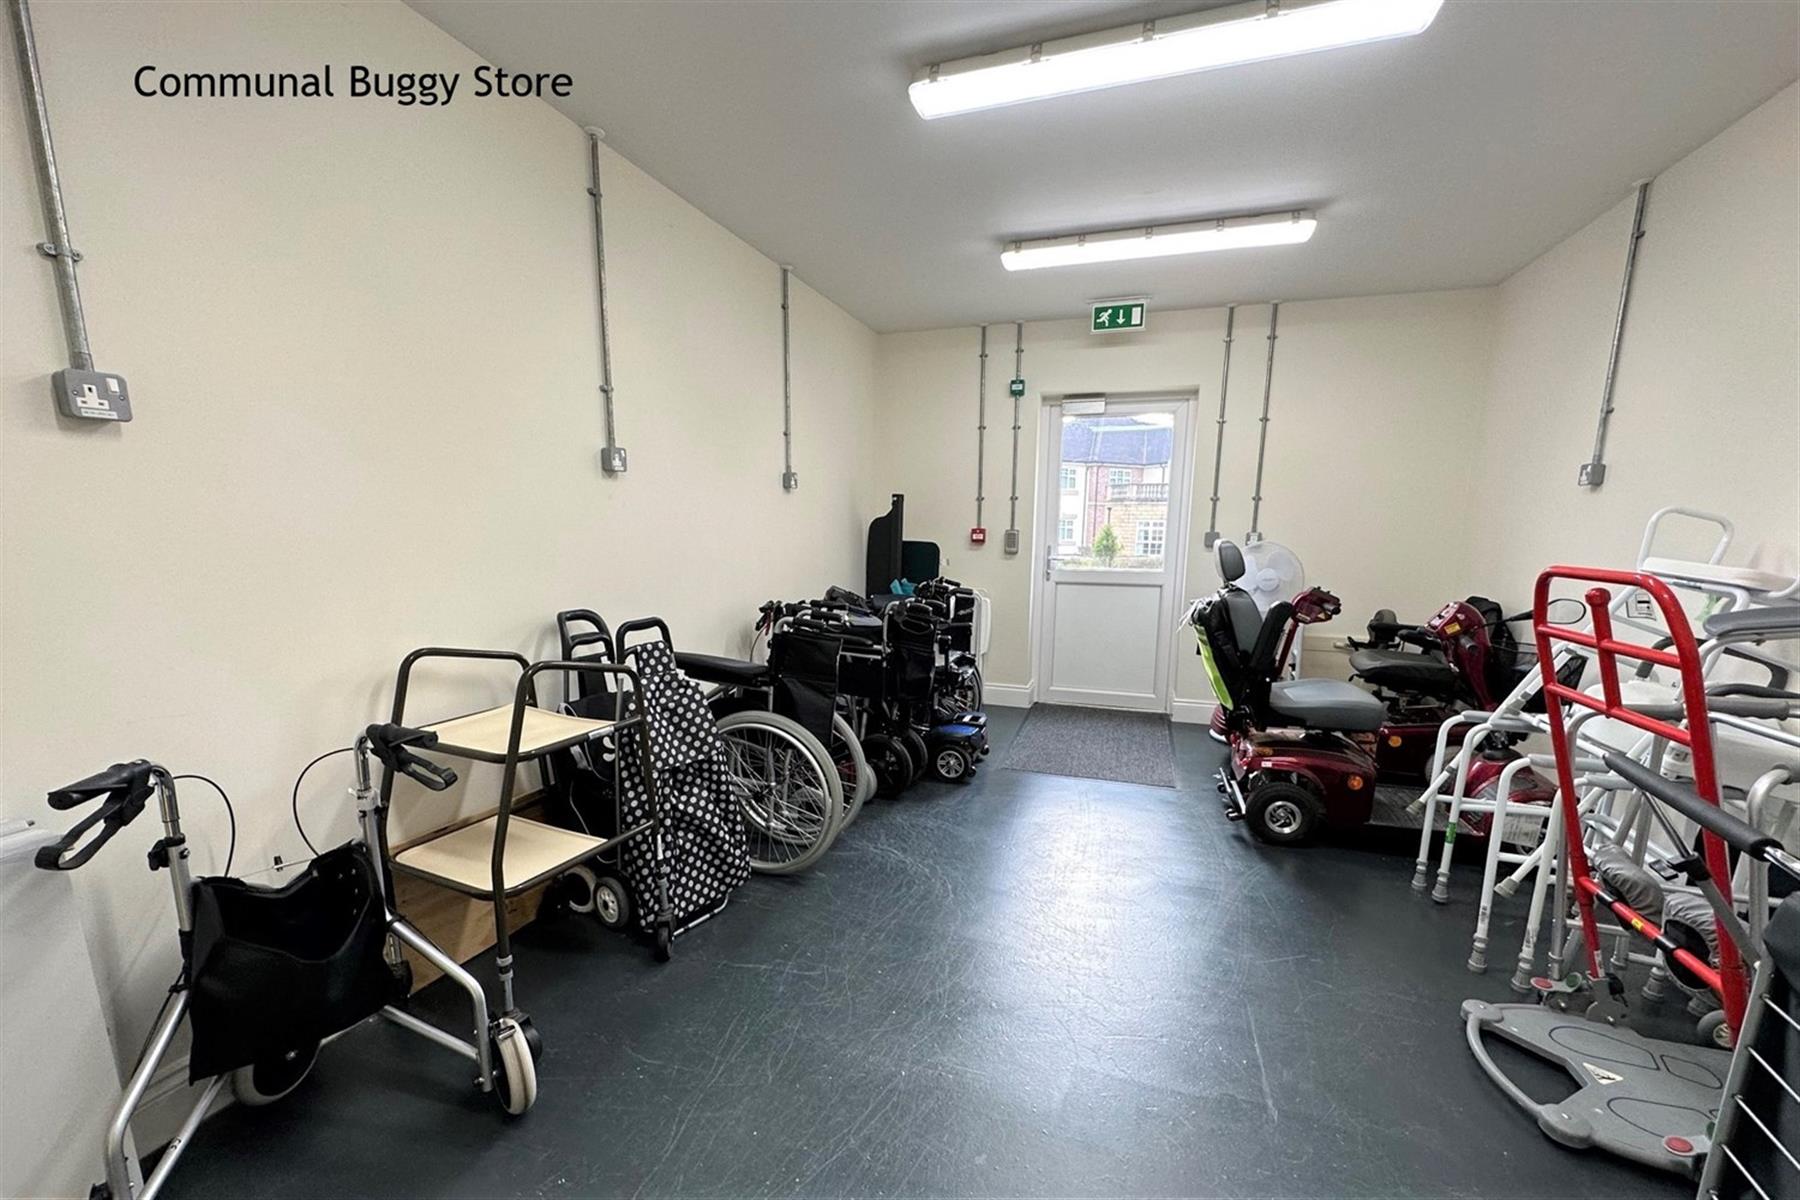 Communal Buggy Store